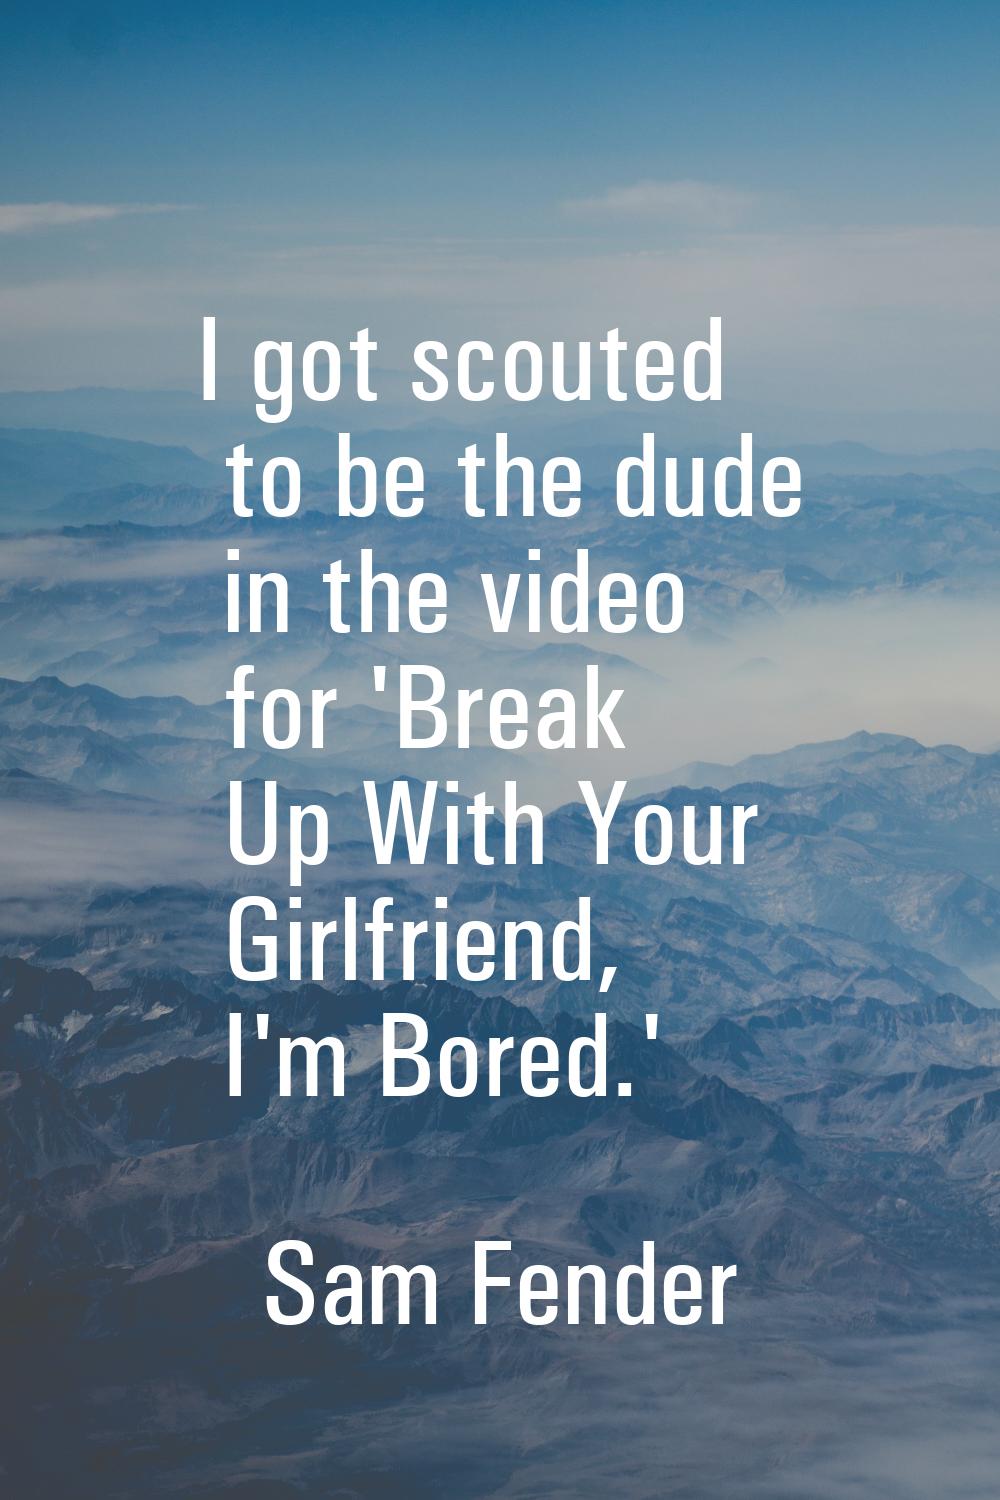 I got scouted to be the dude in the video for 'Break Up With Your Girlfriend, I'm Bored.'